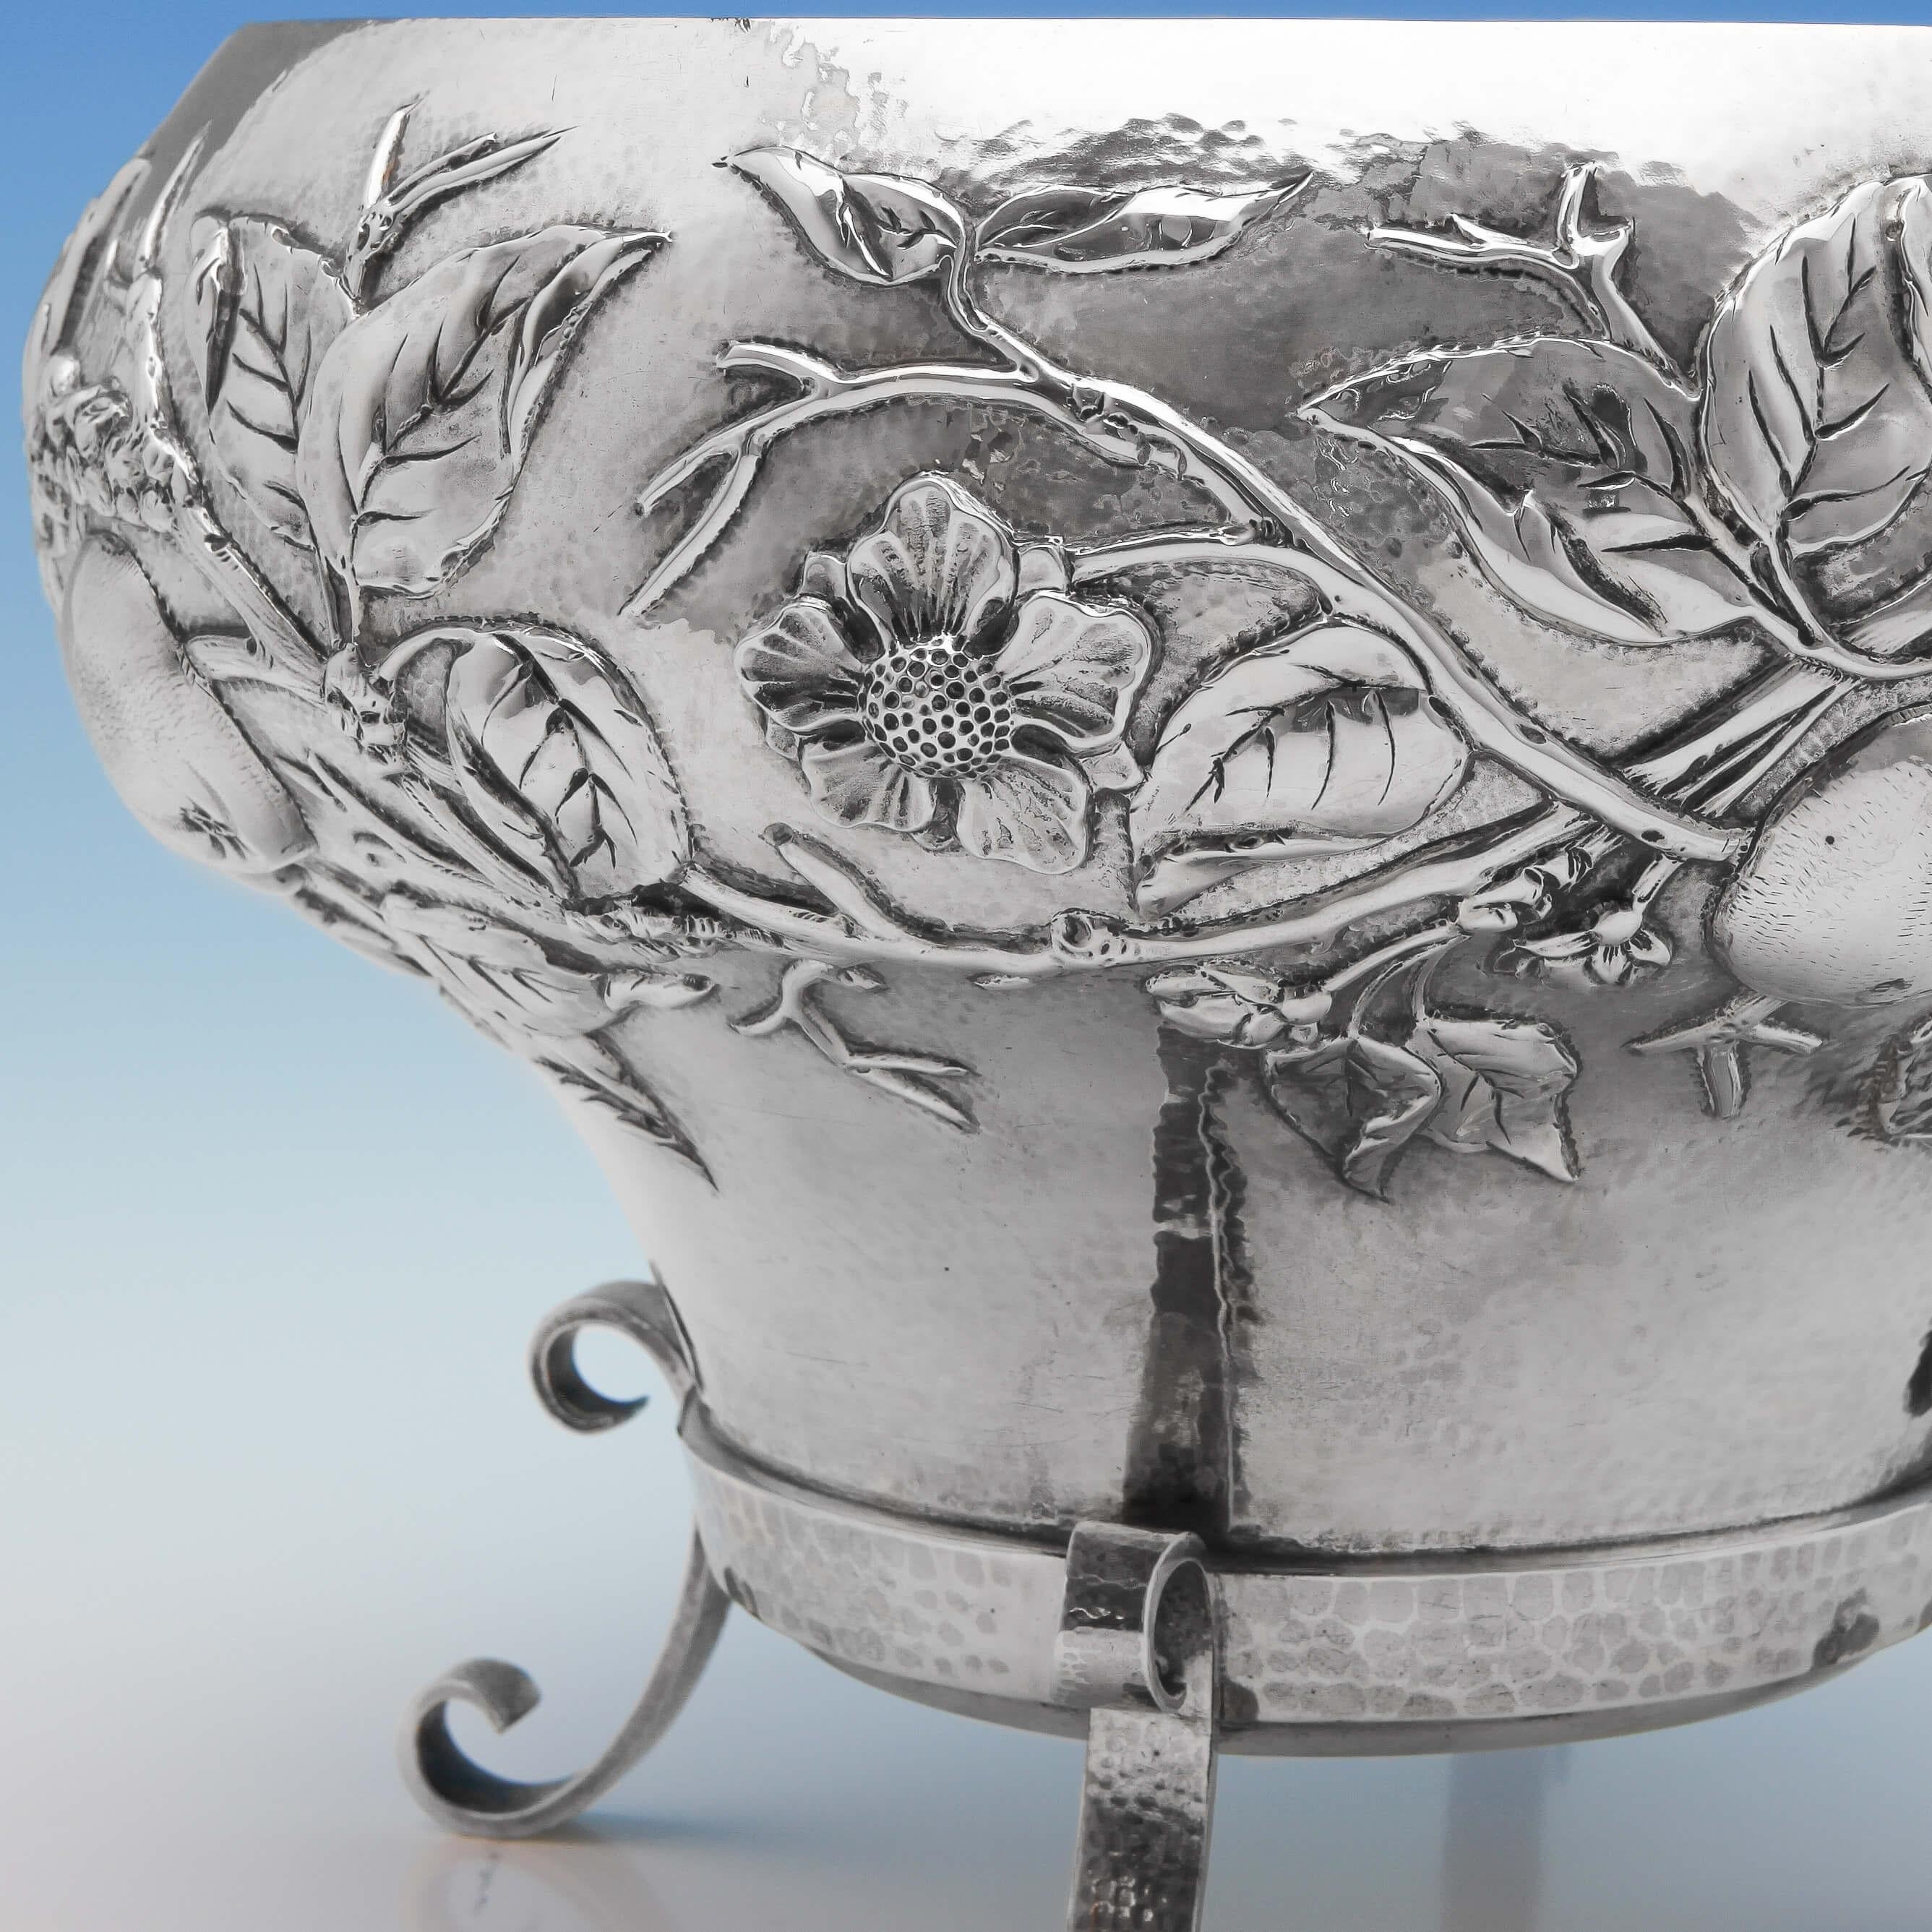 Hallmarked in London in 1902 by Walker & Tolhurst, this superb Antique, sterling silver bowl or centrepiece, is a design attributed to Latino Movio and clearly influenced by the work of celebrated designer Gilbert Marks, to whom Movio is believed to